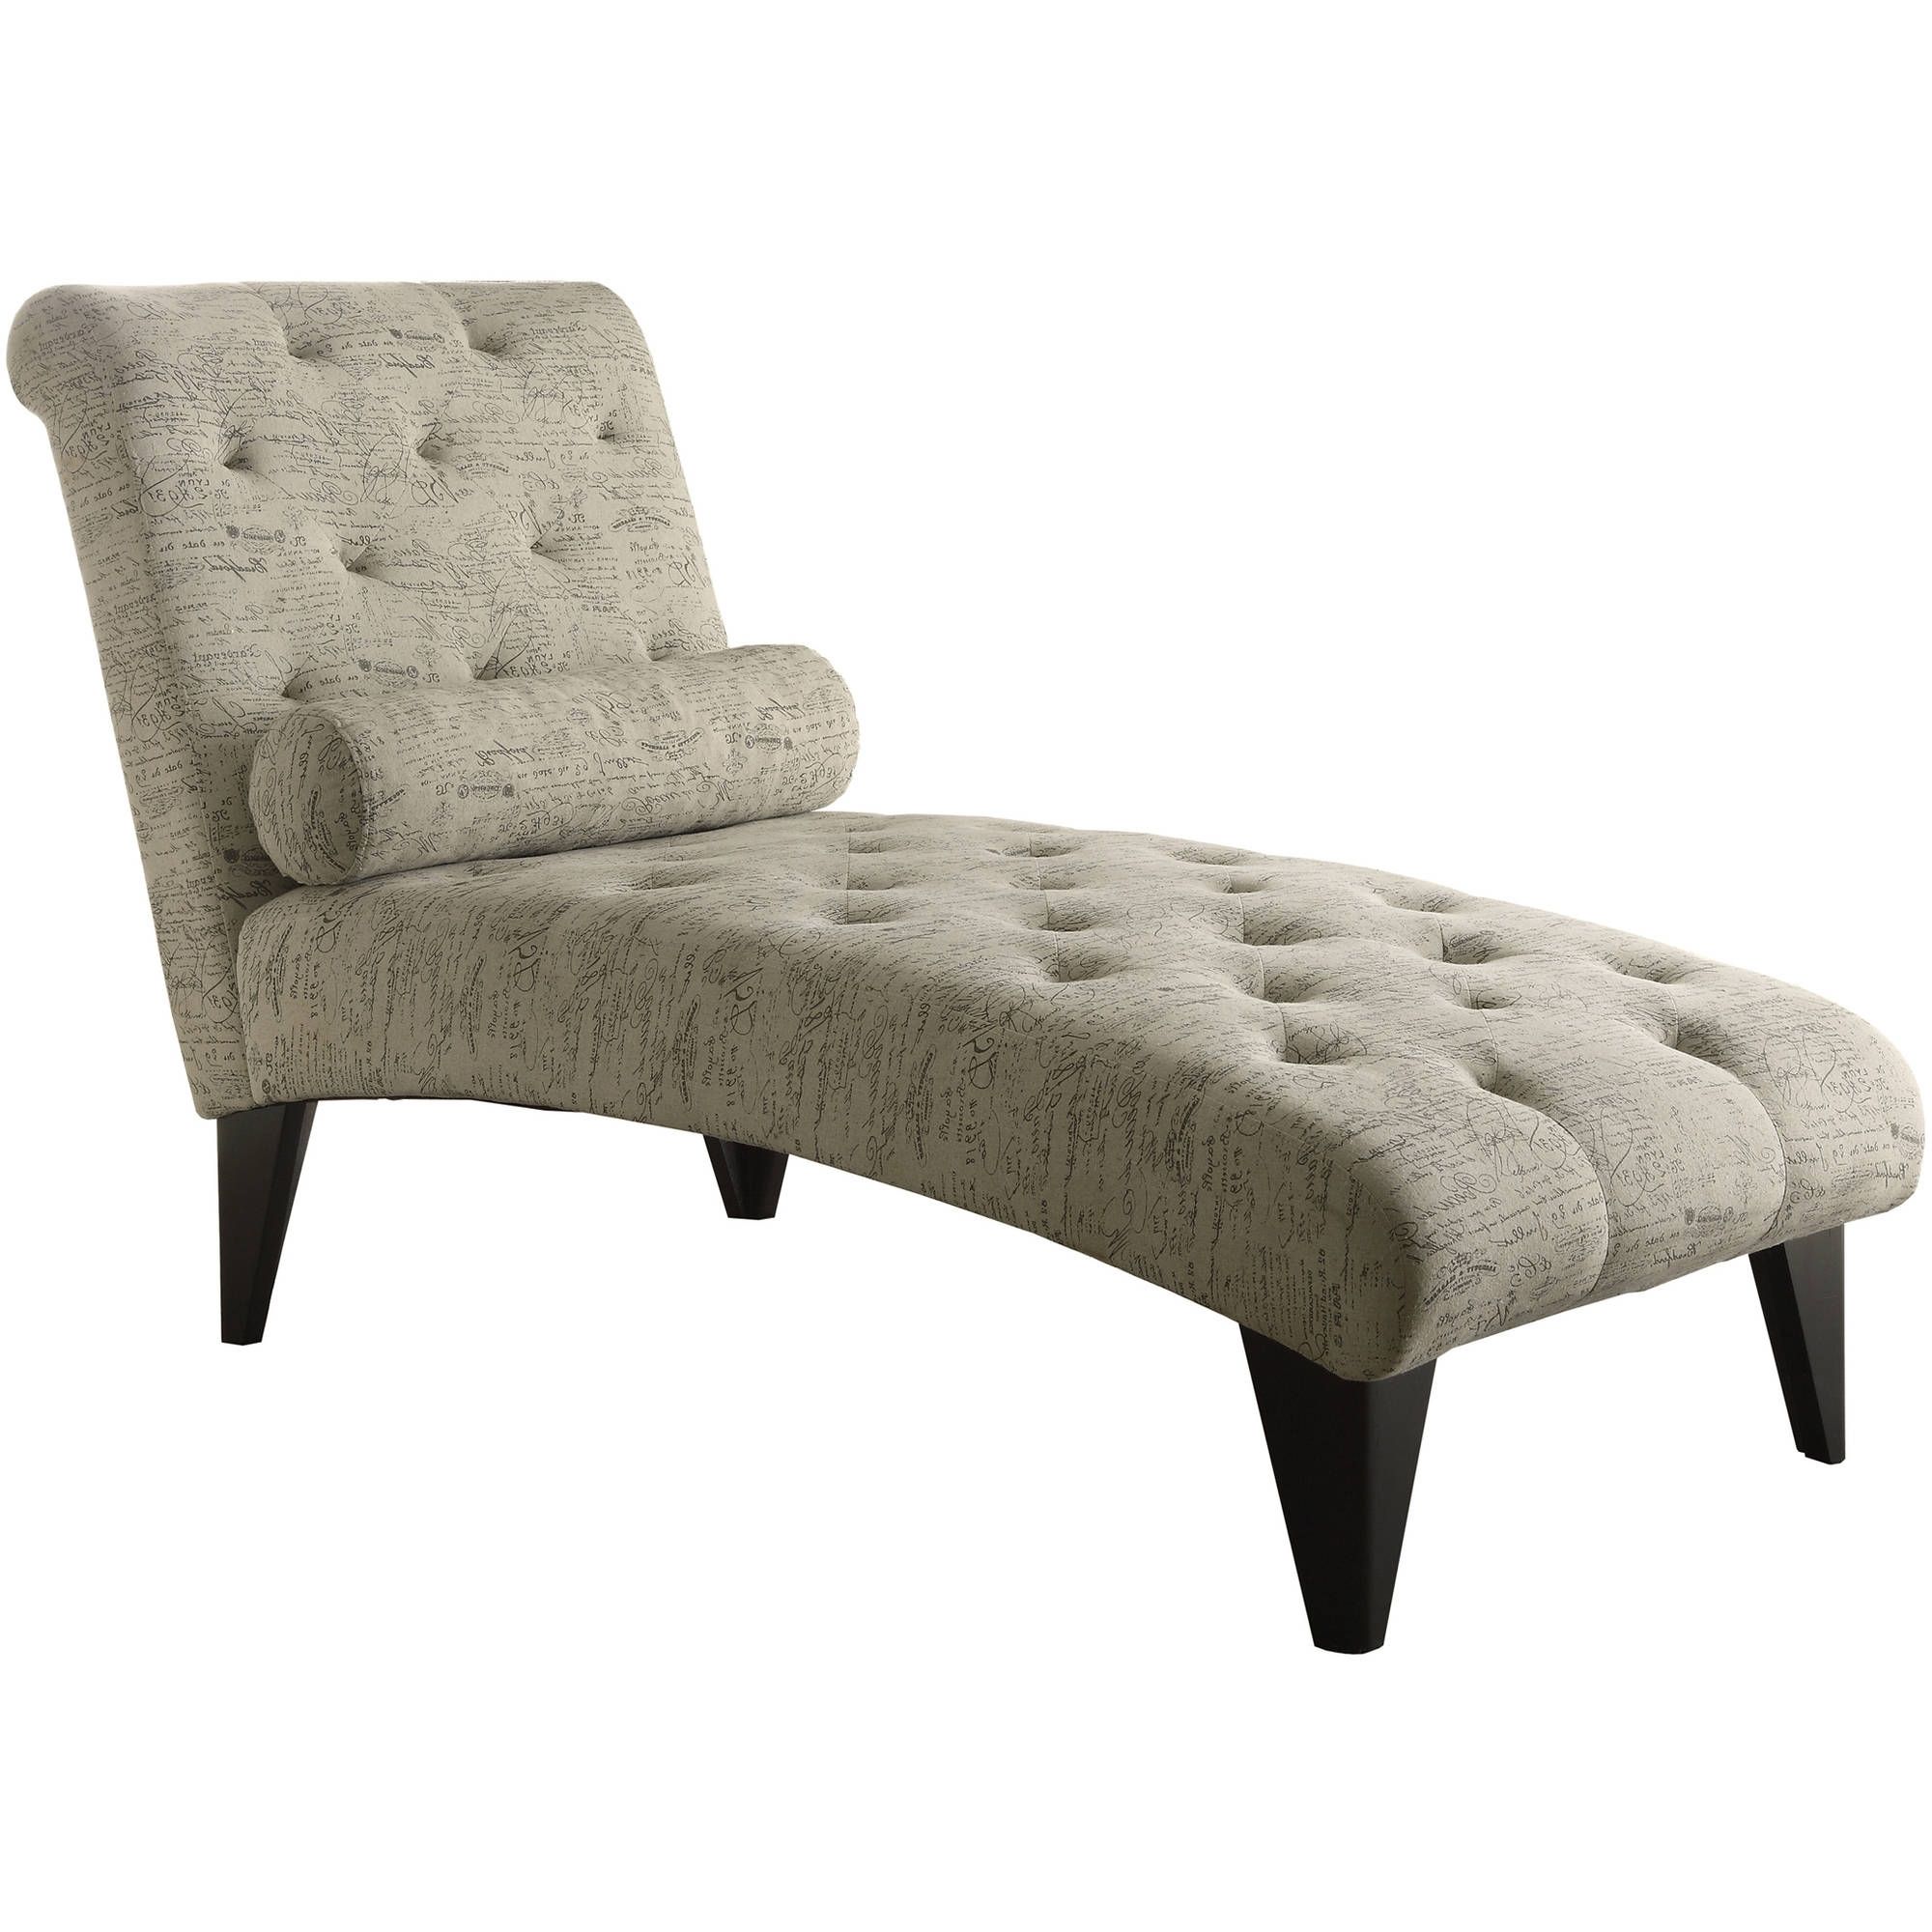 Sofa Chaise Lounges In Preferred Chaise Lounges – Walmart (View 11 of 15)